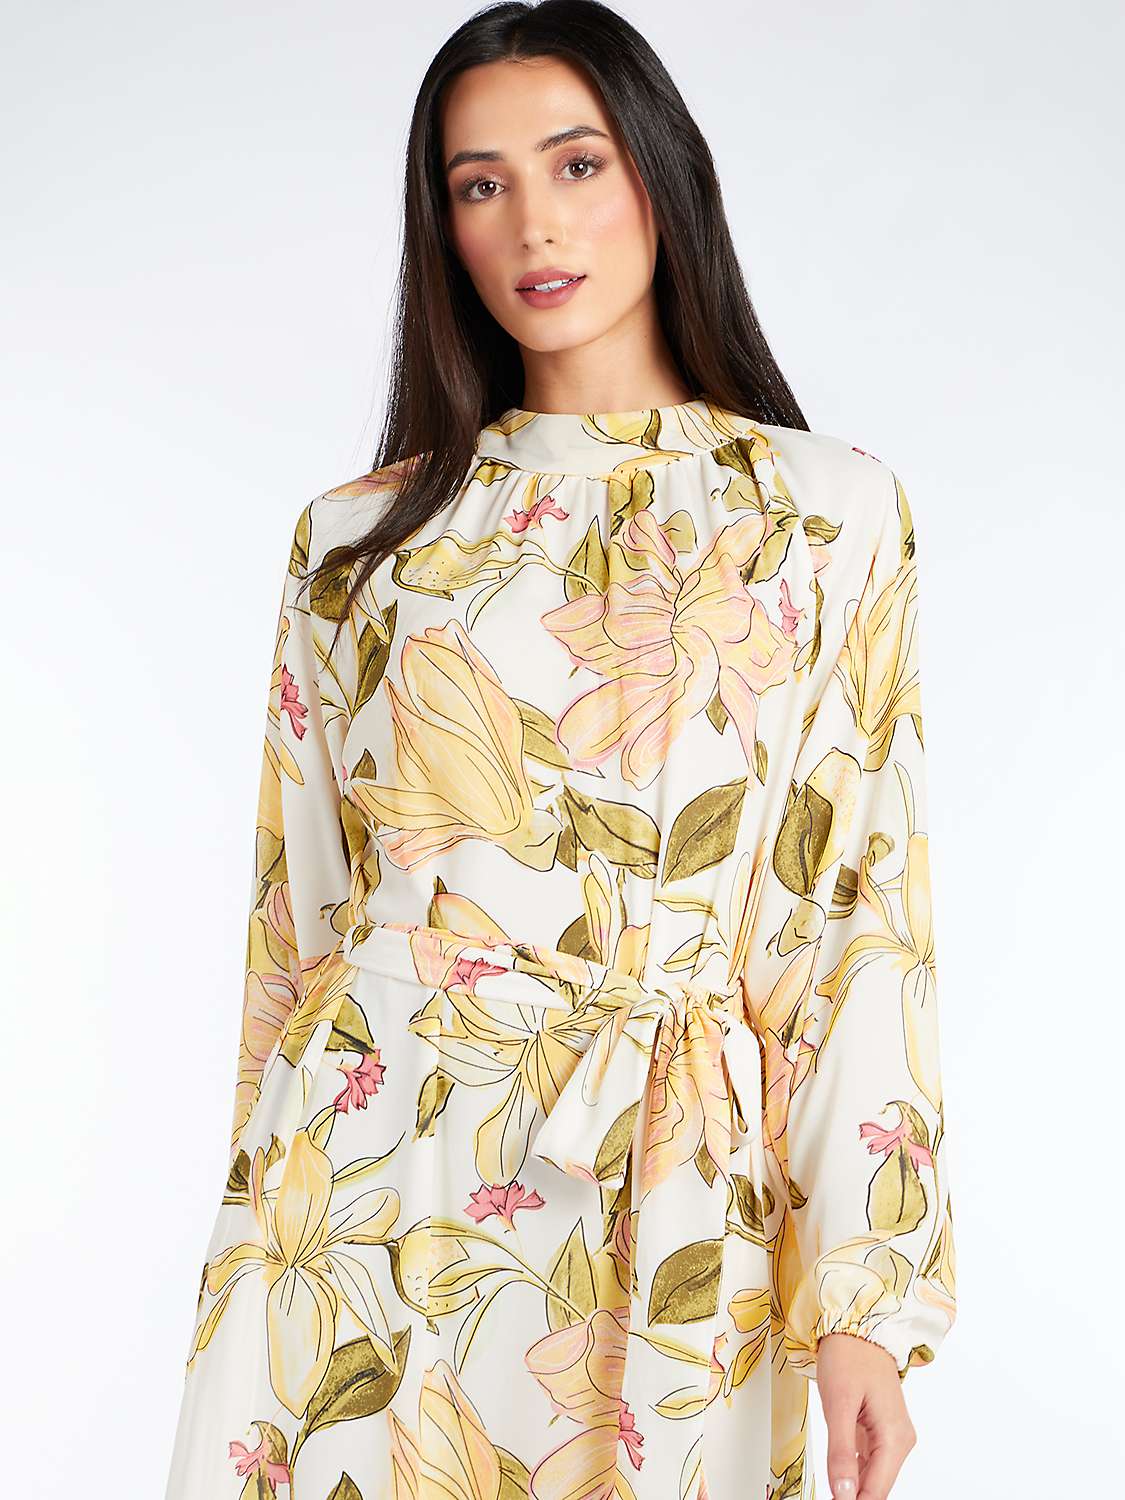 Buy Aab Nymphaea Floral Print Maxi Dress, Yellow/Multi Online at johnlewis.com